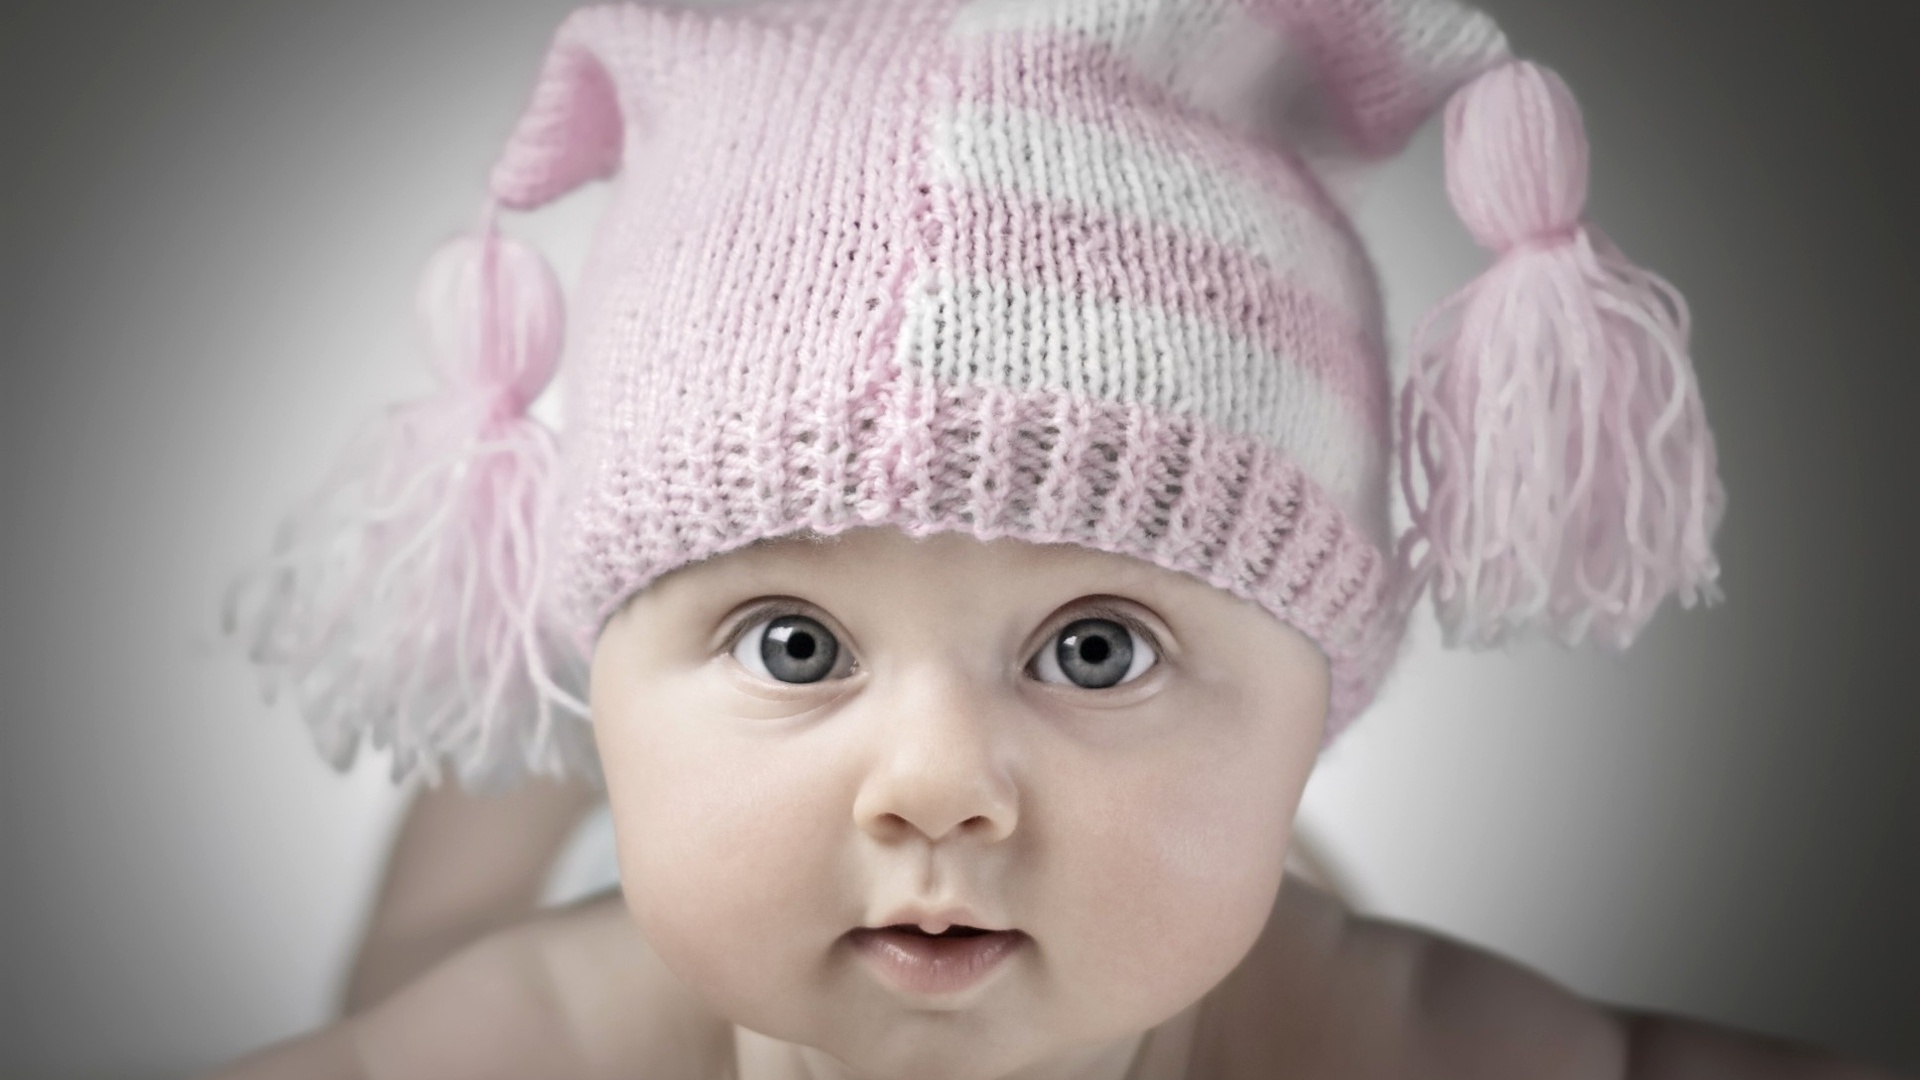 Cute Baby Wallpapers 1920x1080